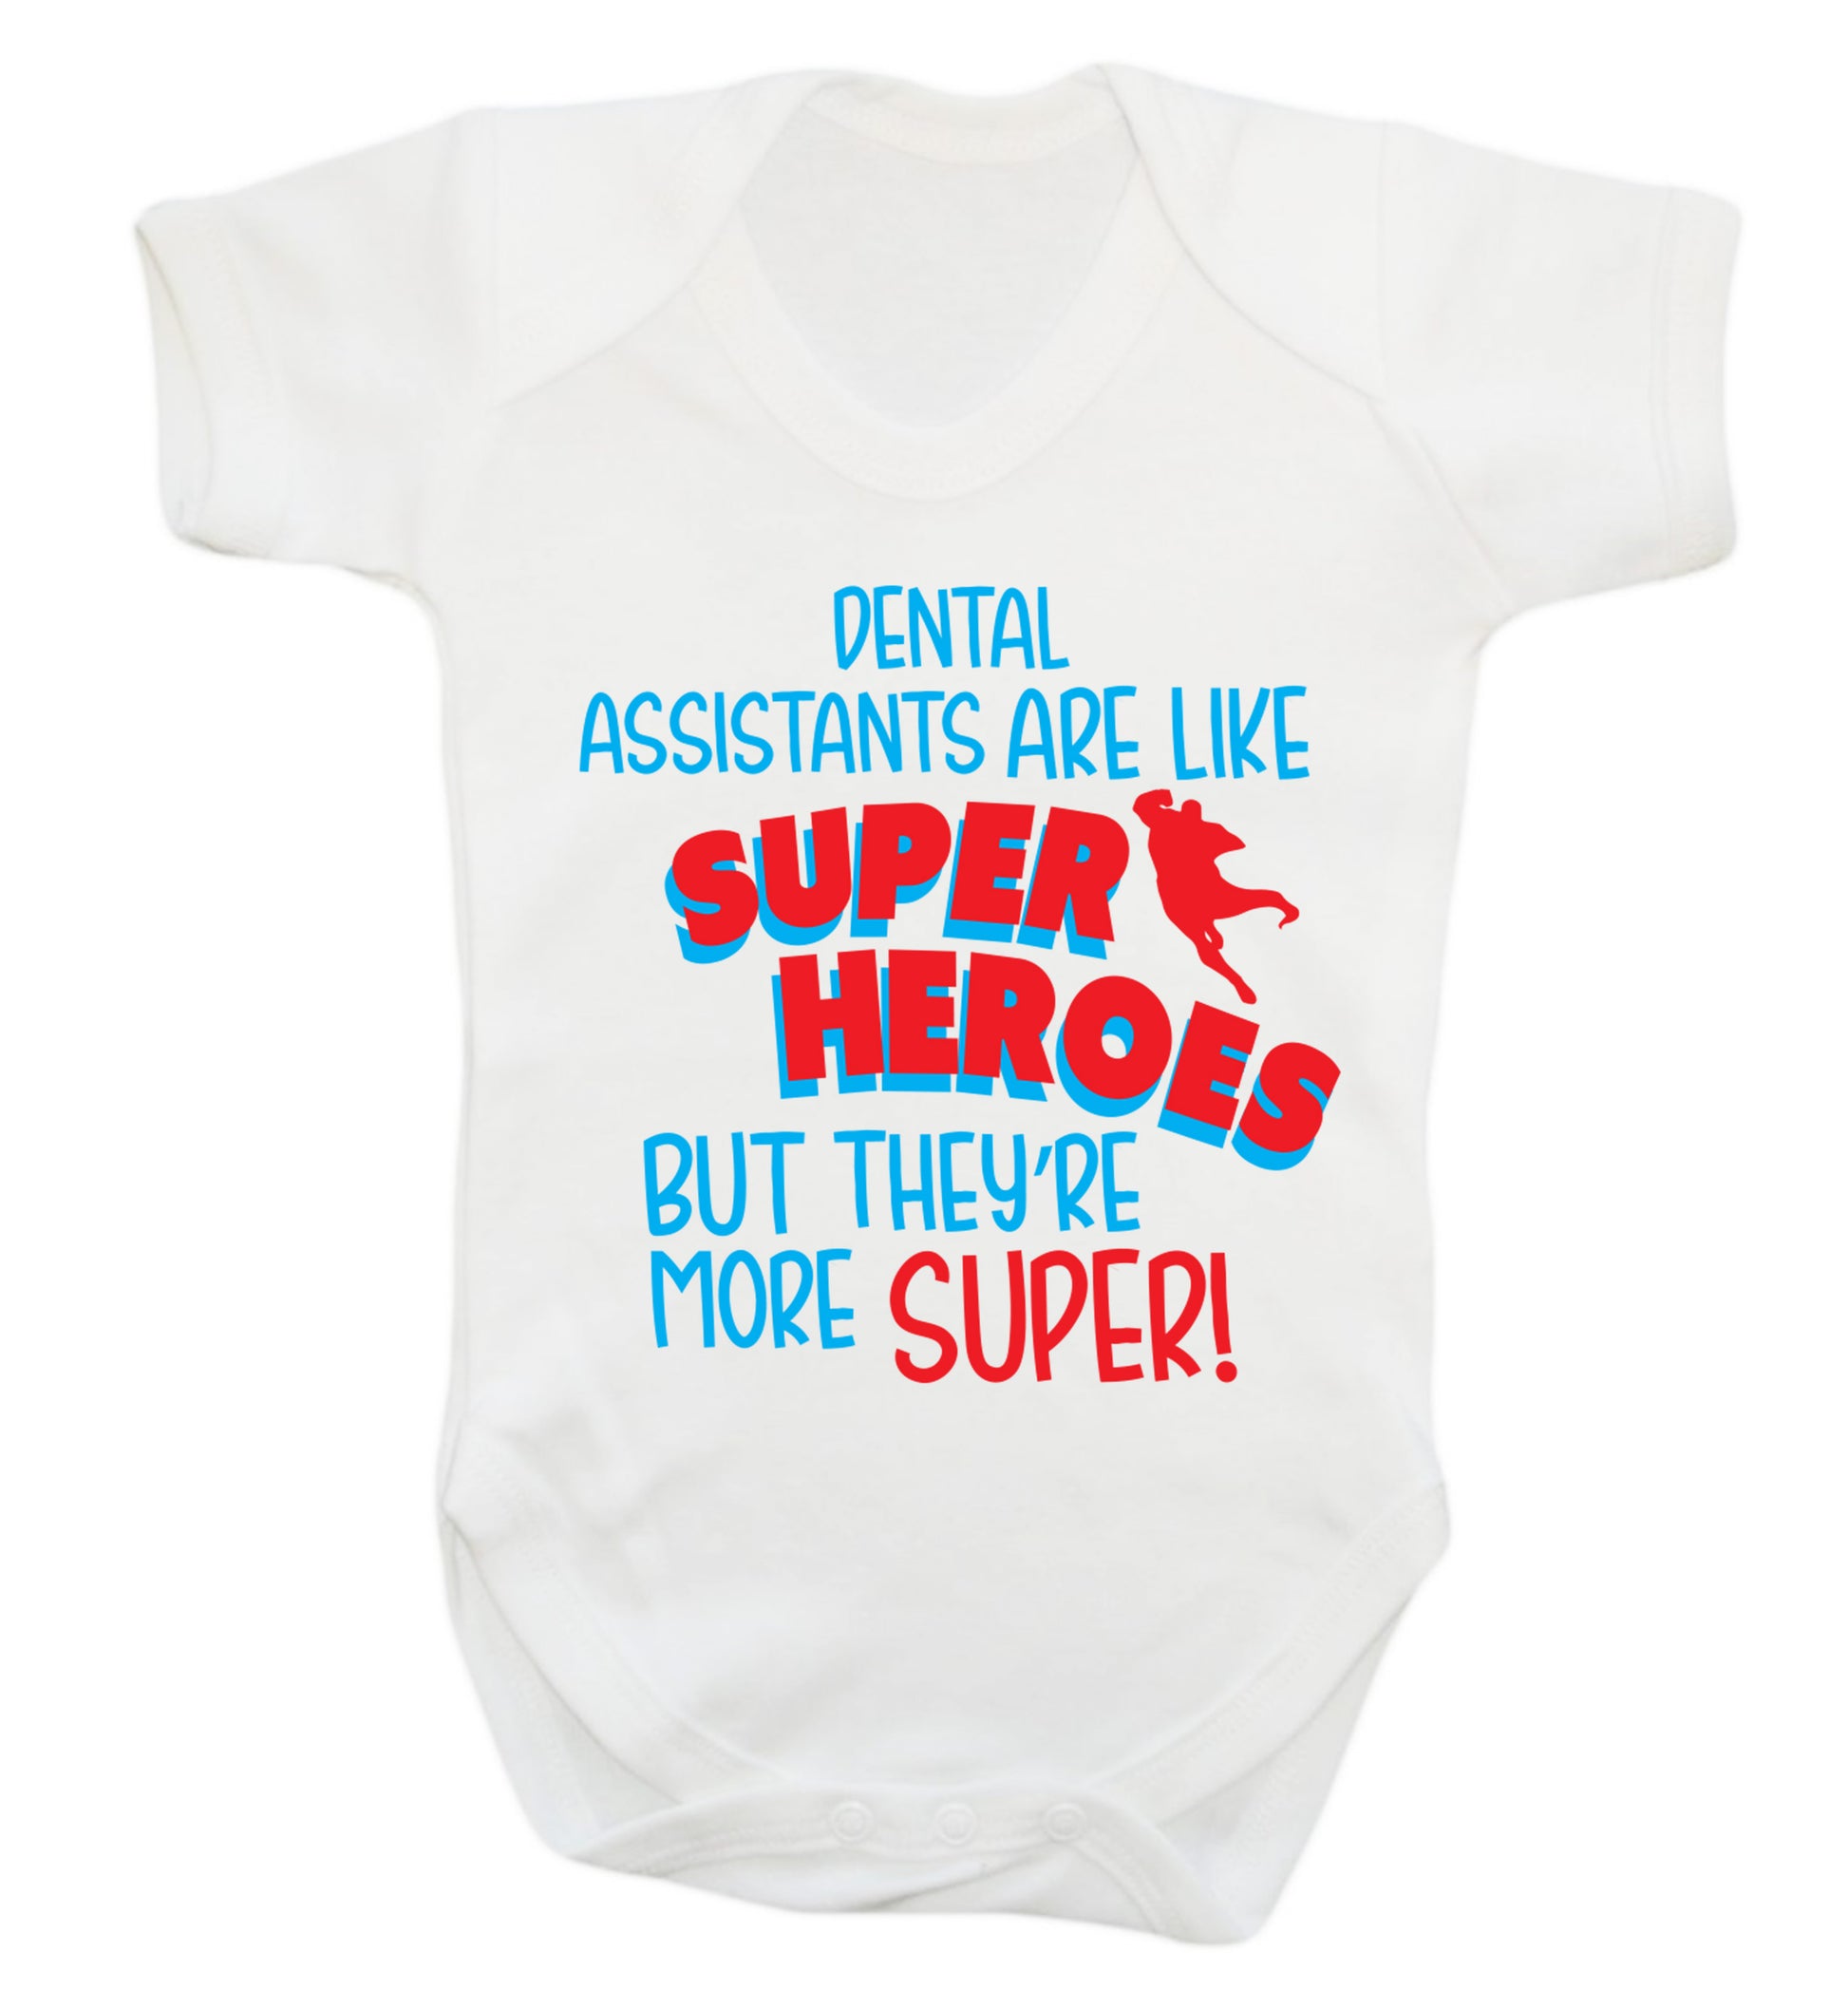 Dental Assistants are like superheros but they're more super Baby Vest white 18-24 months